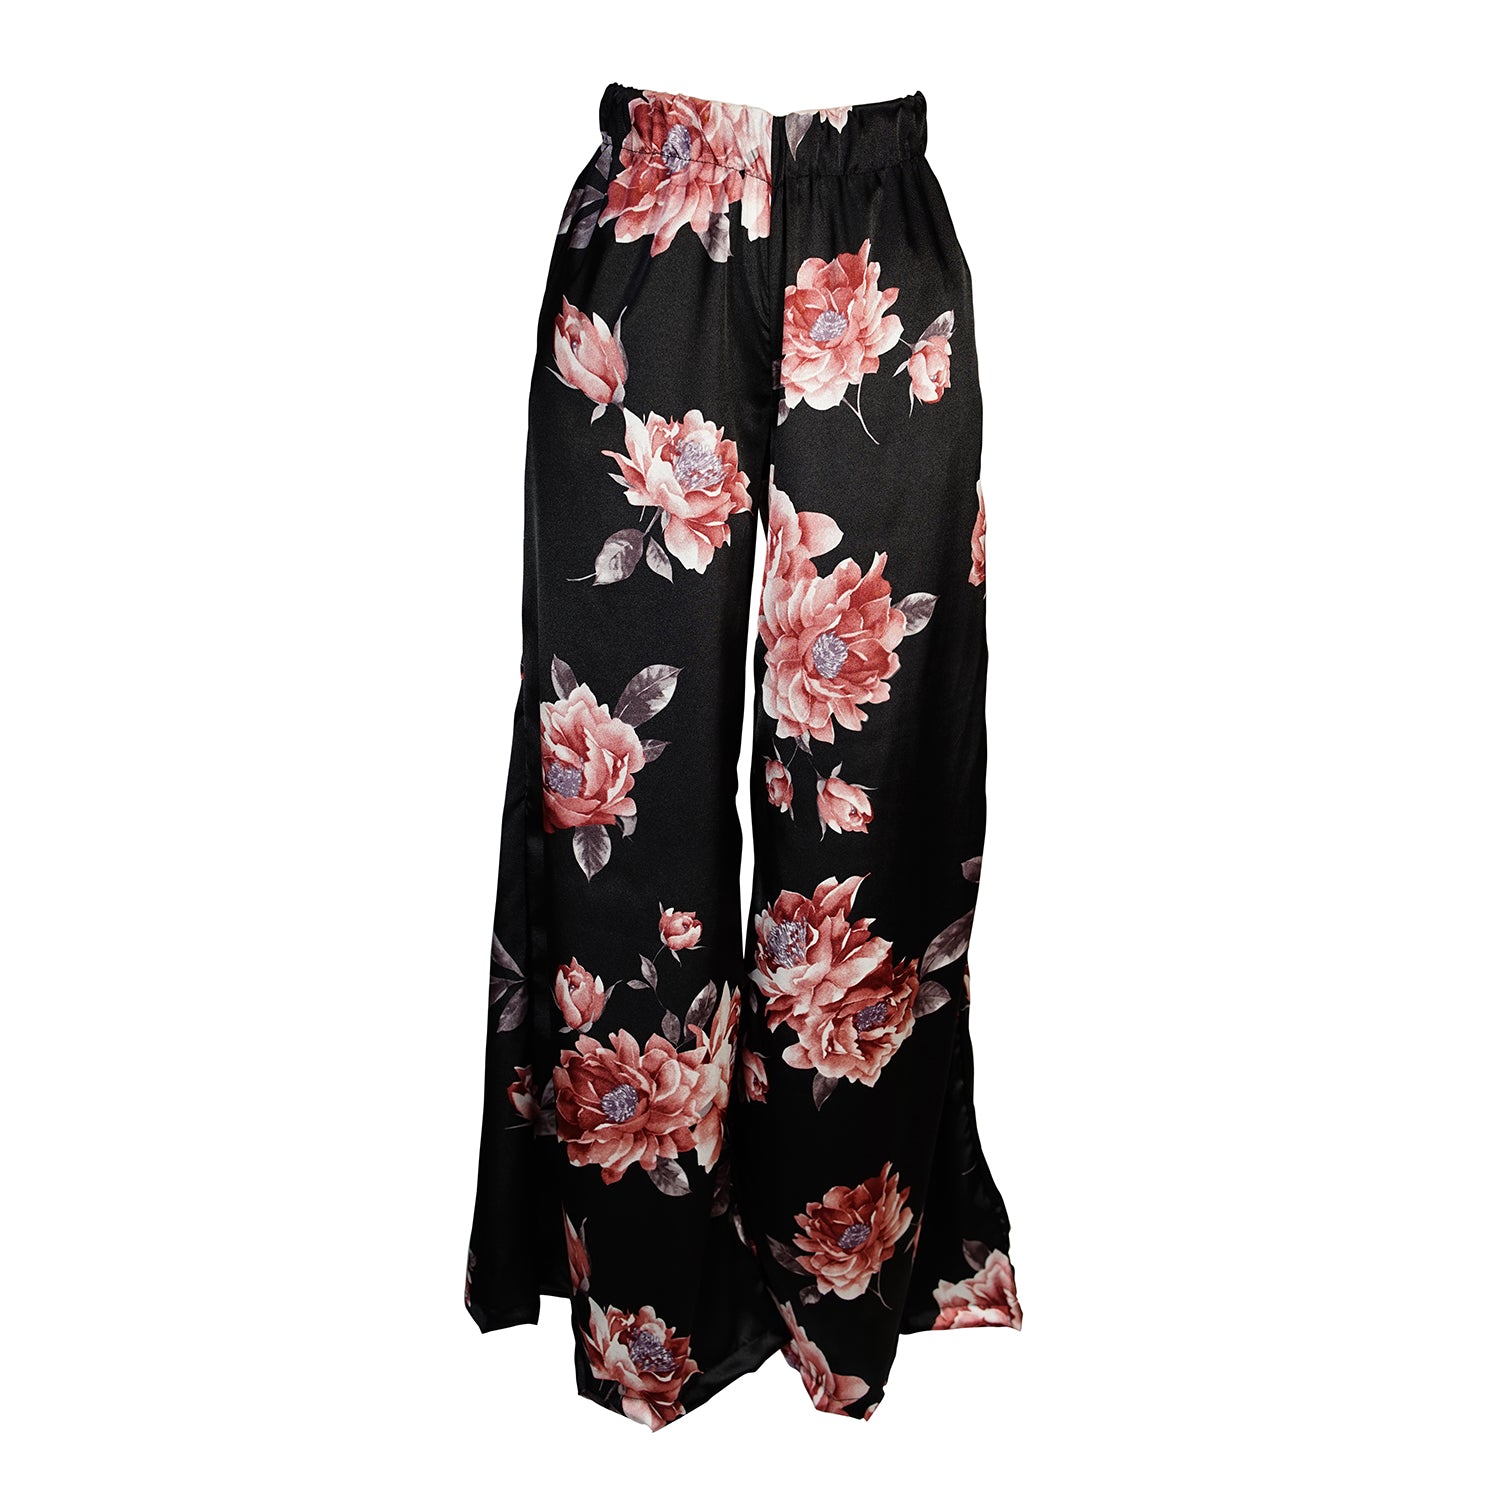 Loungewear set in dark floral pattern. A black background with light pink flowers, this set comes with a wrap dolman jacket.  Sleeves have a forearm hem, and it can be worn as an open jacket or wrap with matching tie belt. The belt features fringe tassels. The matching pants have pockets and an ankle length hem. 